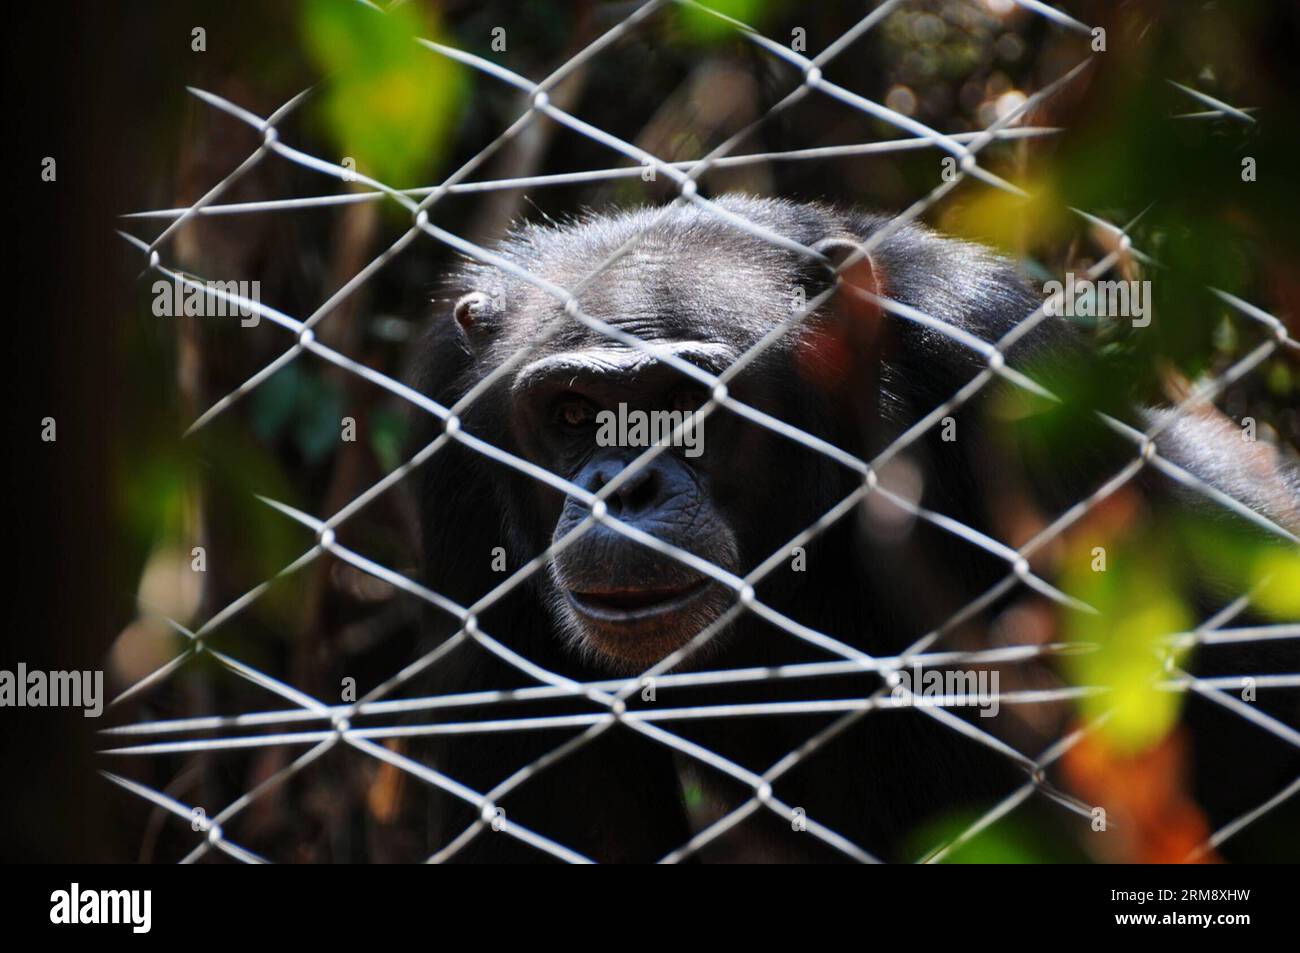 FREETOWN, April 28, 2014 (Xinhua) -- A chimpanzee looks at tourists from inside of the wire netting in Tacugama Chimpanzee Sanctuary of Sierra Leone, April 28, 2014. Located close to Freetown, the capital of Sierra Leone, Tacugama Chimpanzee Sanctuary covers 0.4 square kilometers of the 176.88 square kilometers Western Area Peninsula Forest Reserve. Established by Bala Amarasekaran in 1995, Tacugama now cares for over 100 chimpanzees under the work of nearly 30 staffs in several forested enclosures. (Xinhua/Lin Xiaowei) SIERRA LEONE-CHIMPANZEE-SANCTUARY PUBLICATIONxNOTxINxCHN   Freetown April Stock Photo